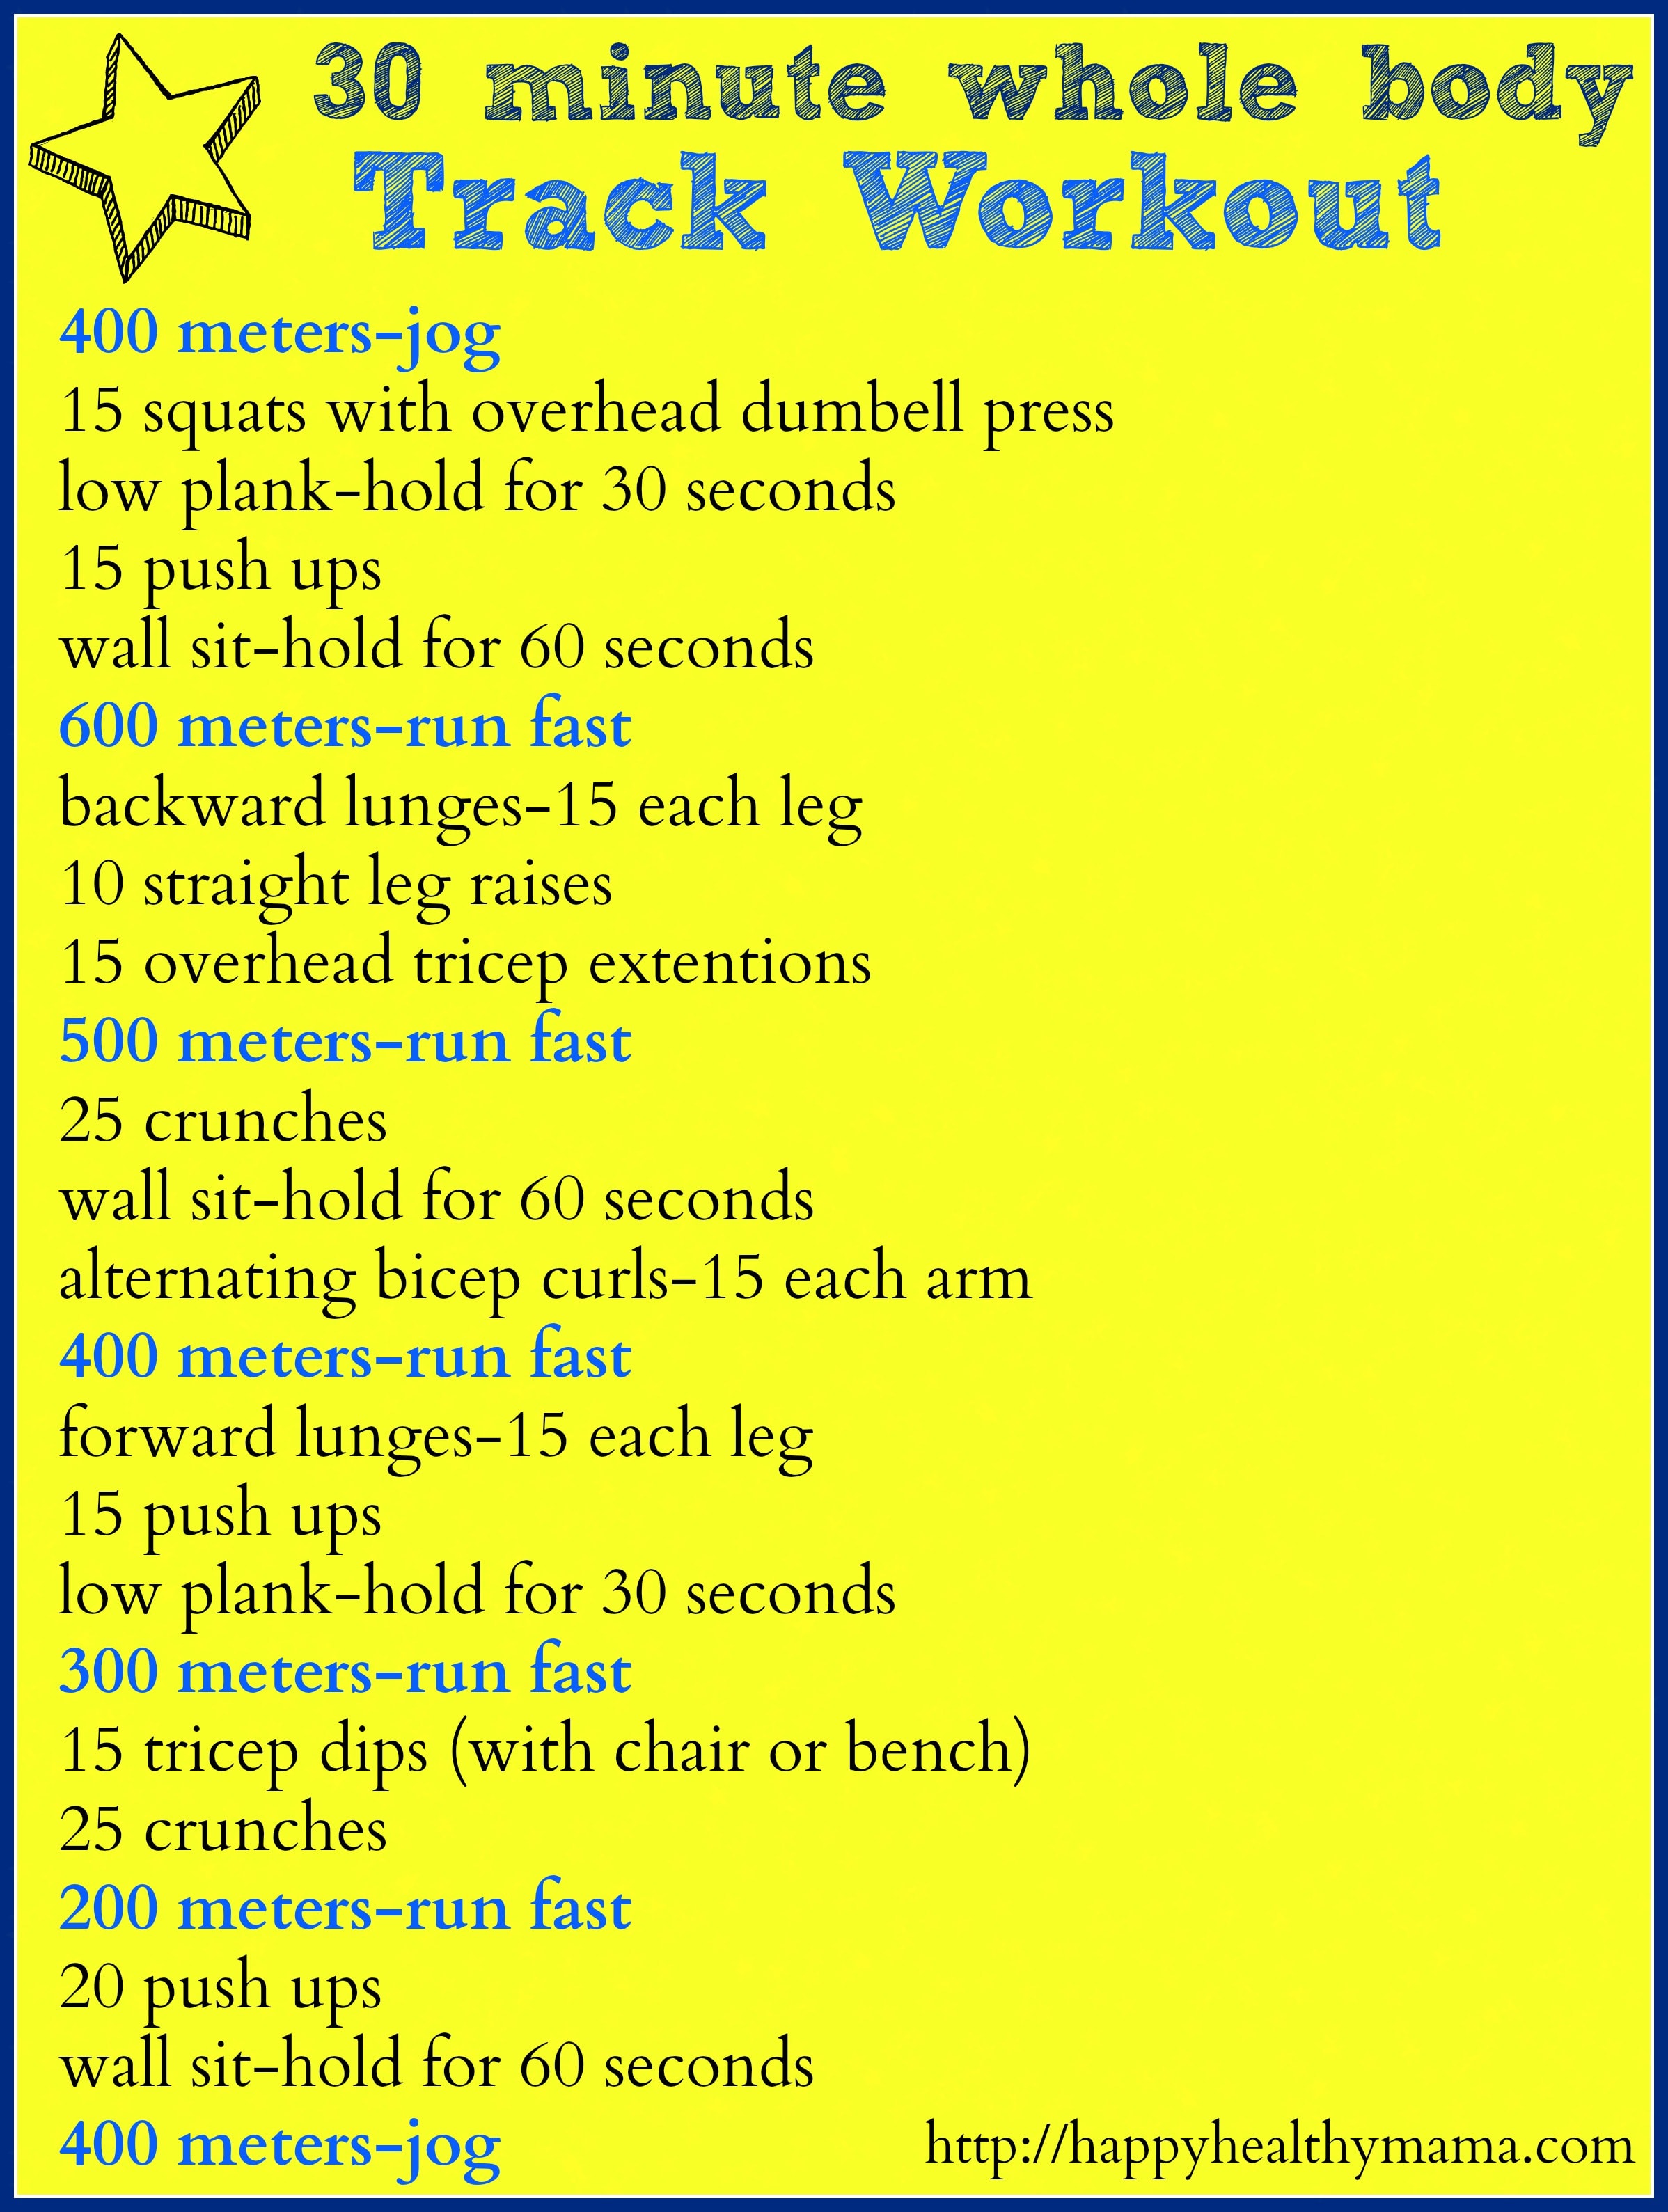 15-Minute Full Body Workout for Women - Total Body Workout at Home